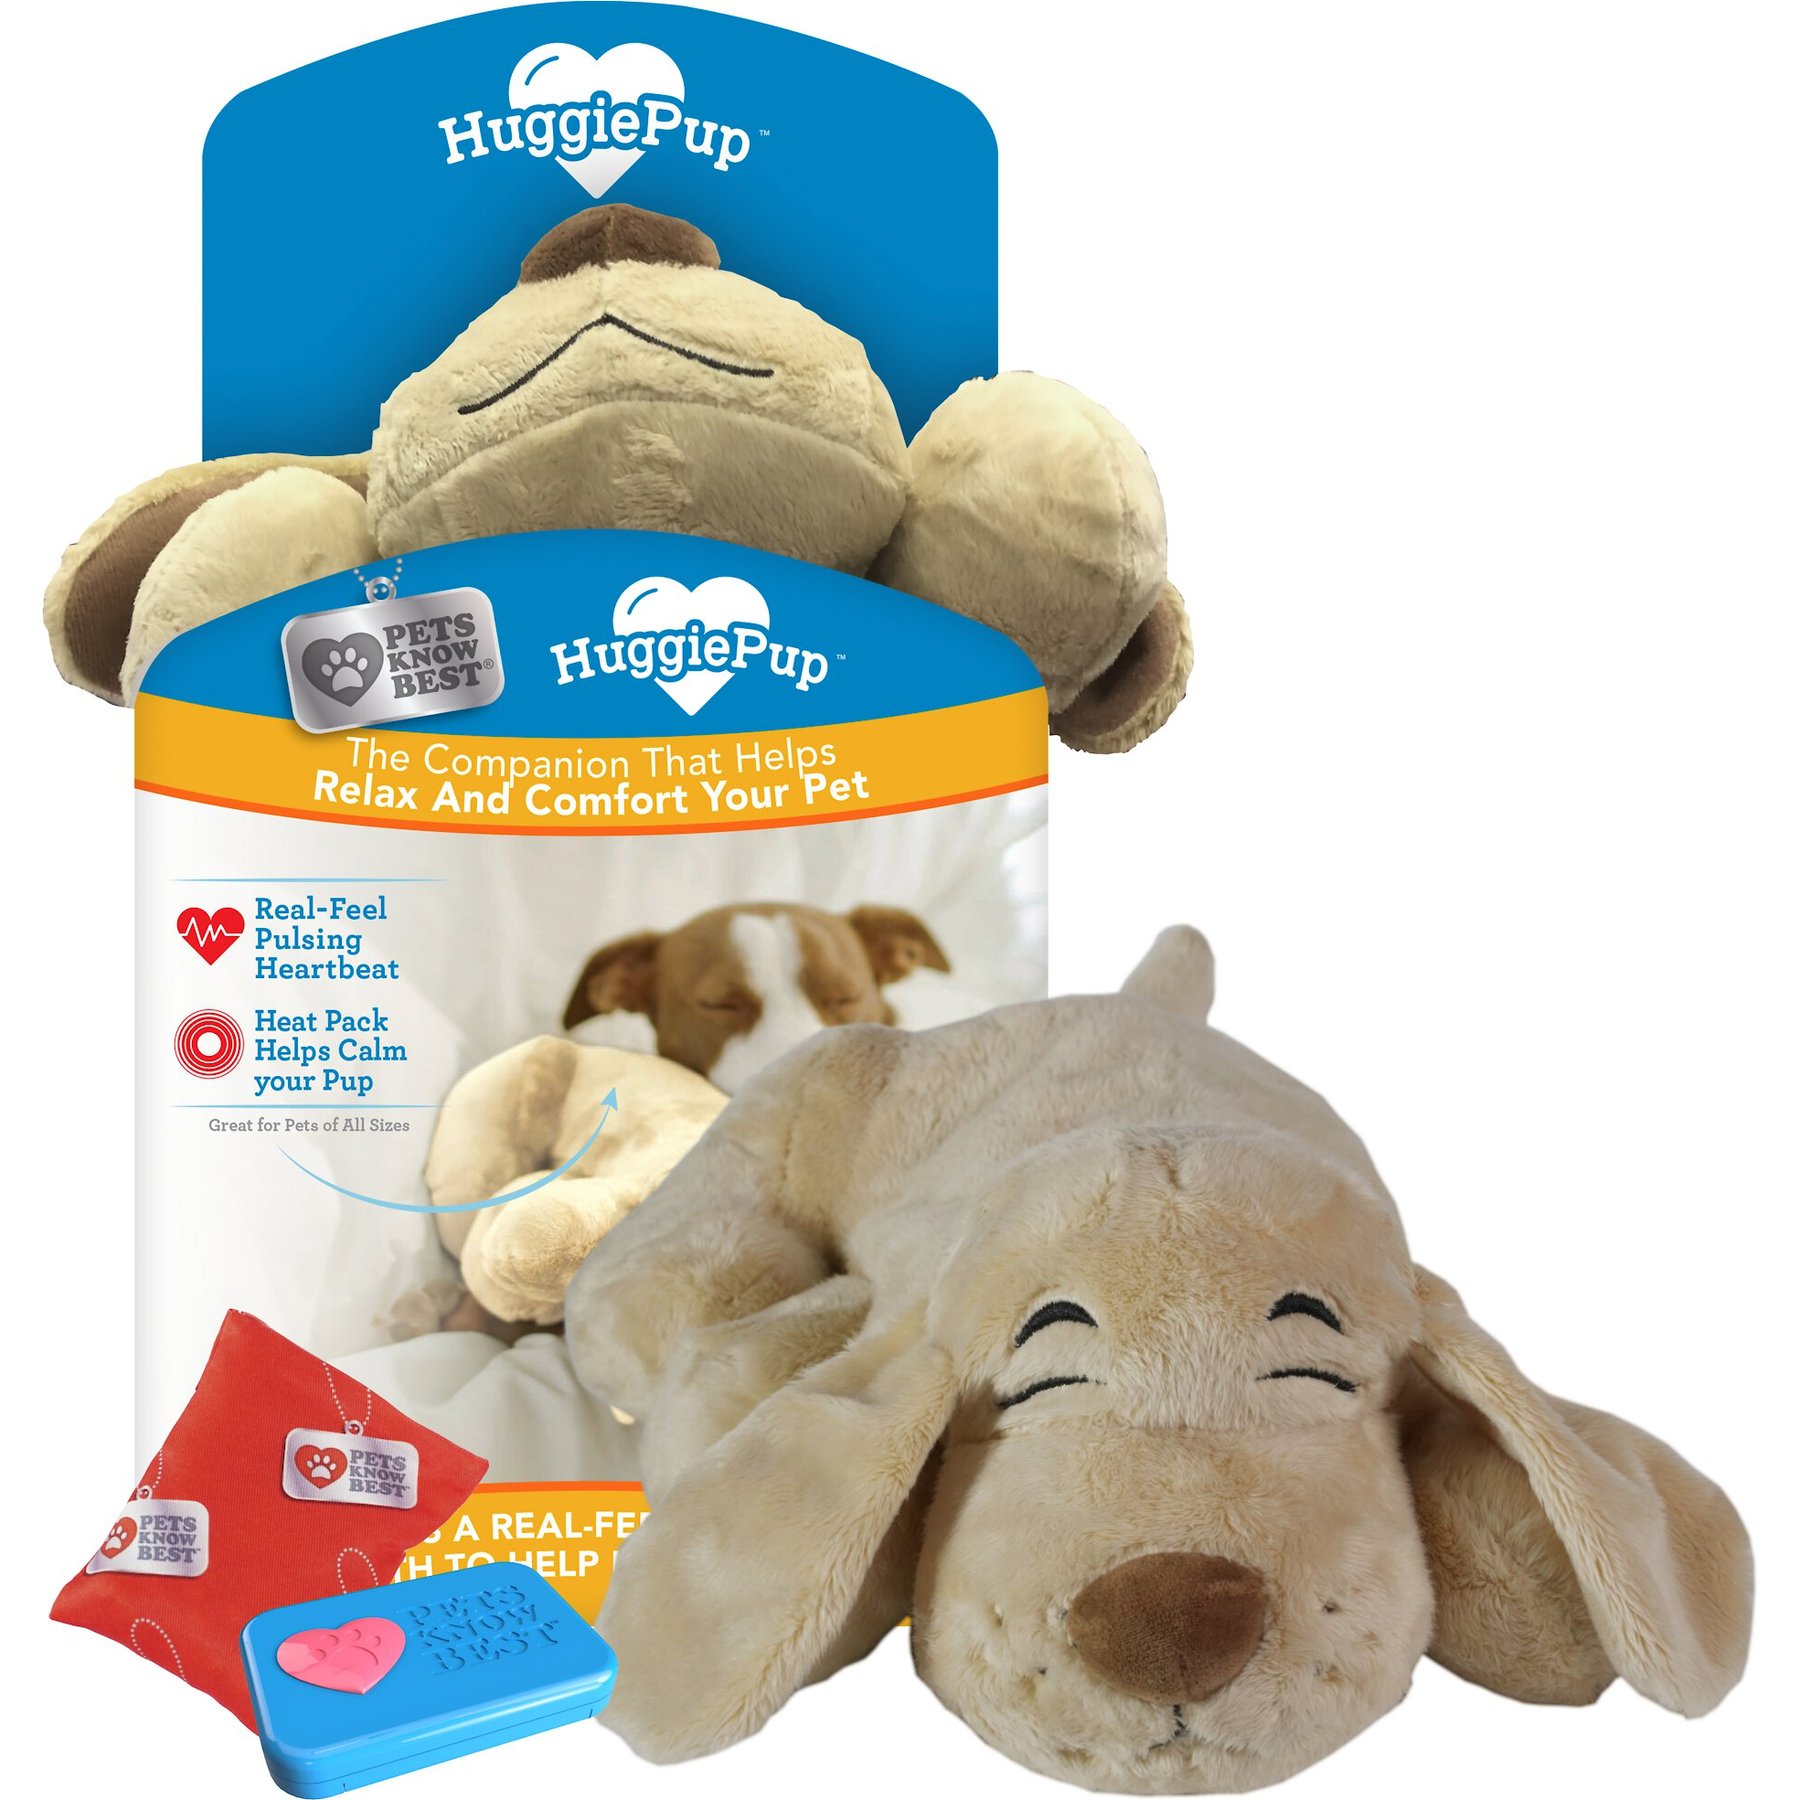 Pets Know Best Huggiepup Plush Dog Toy